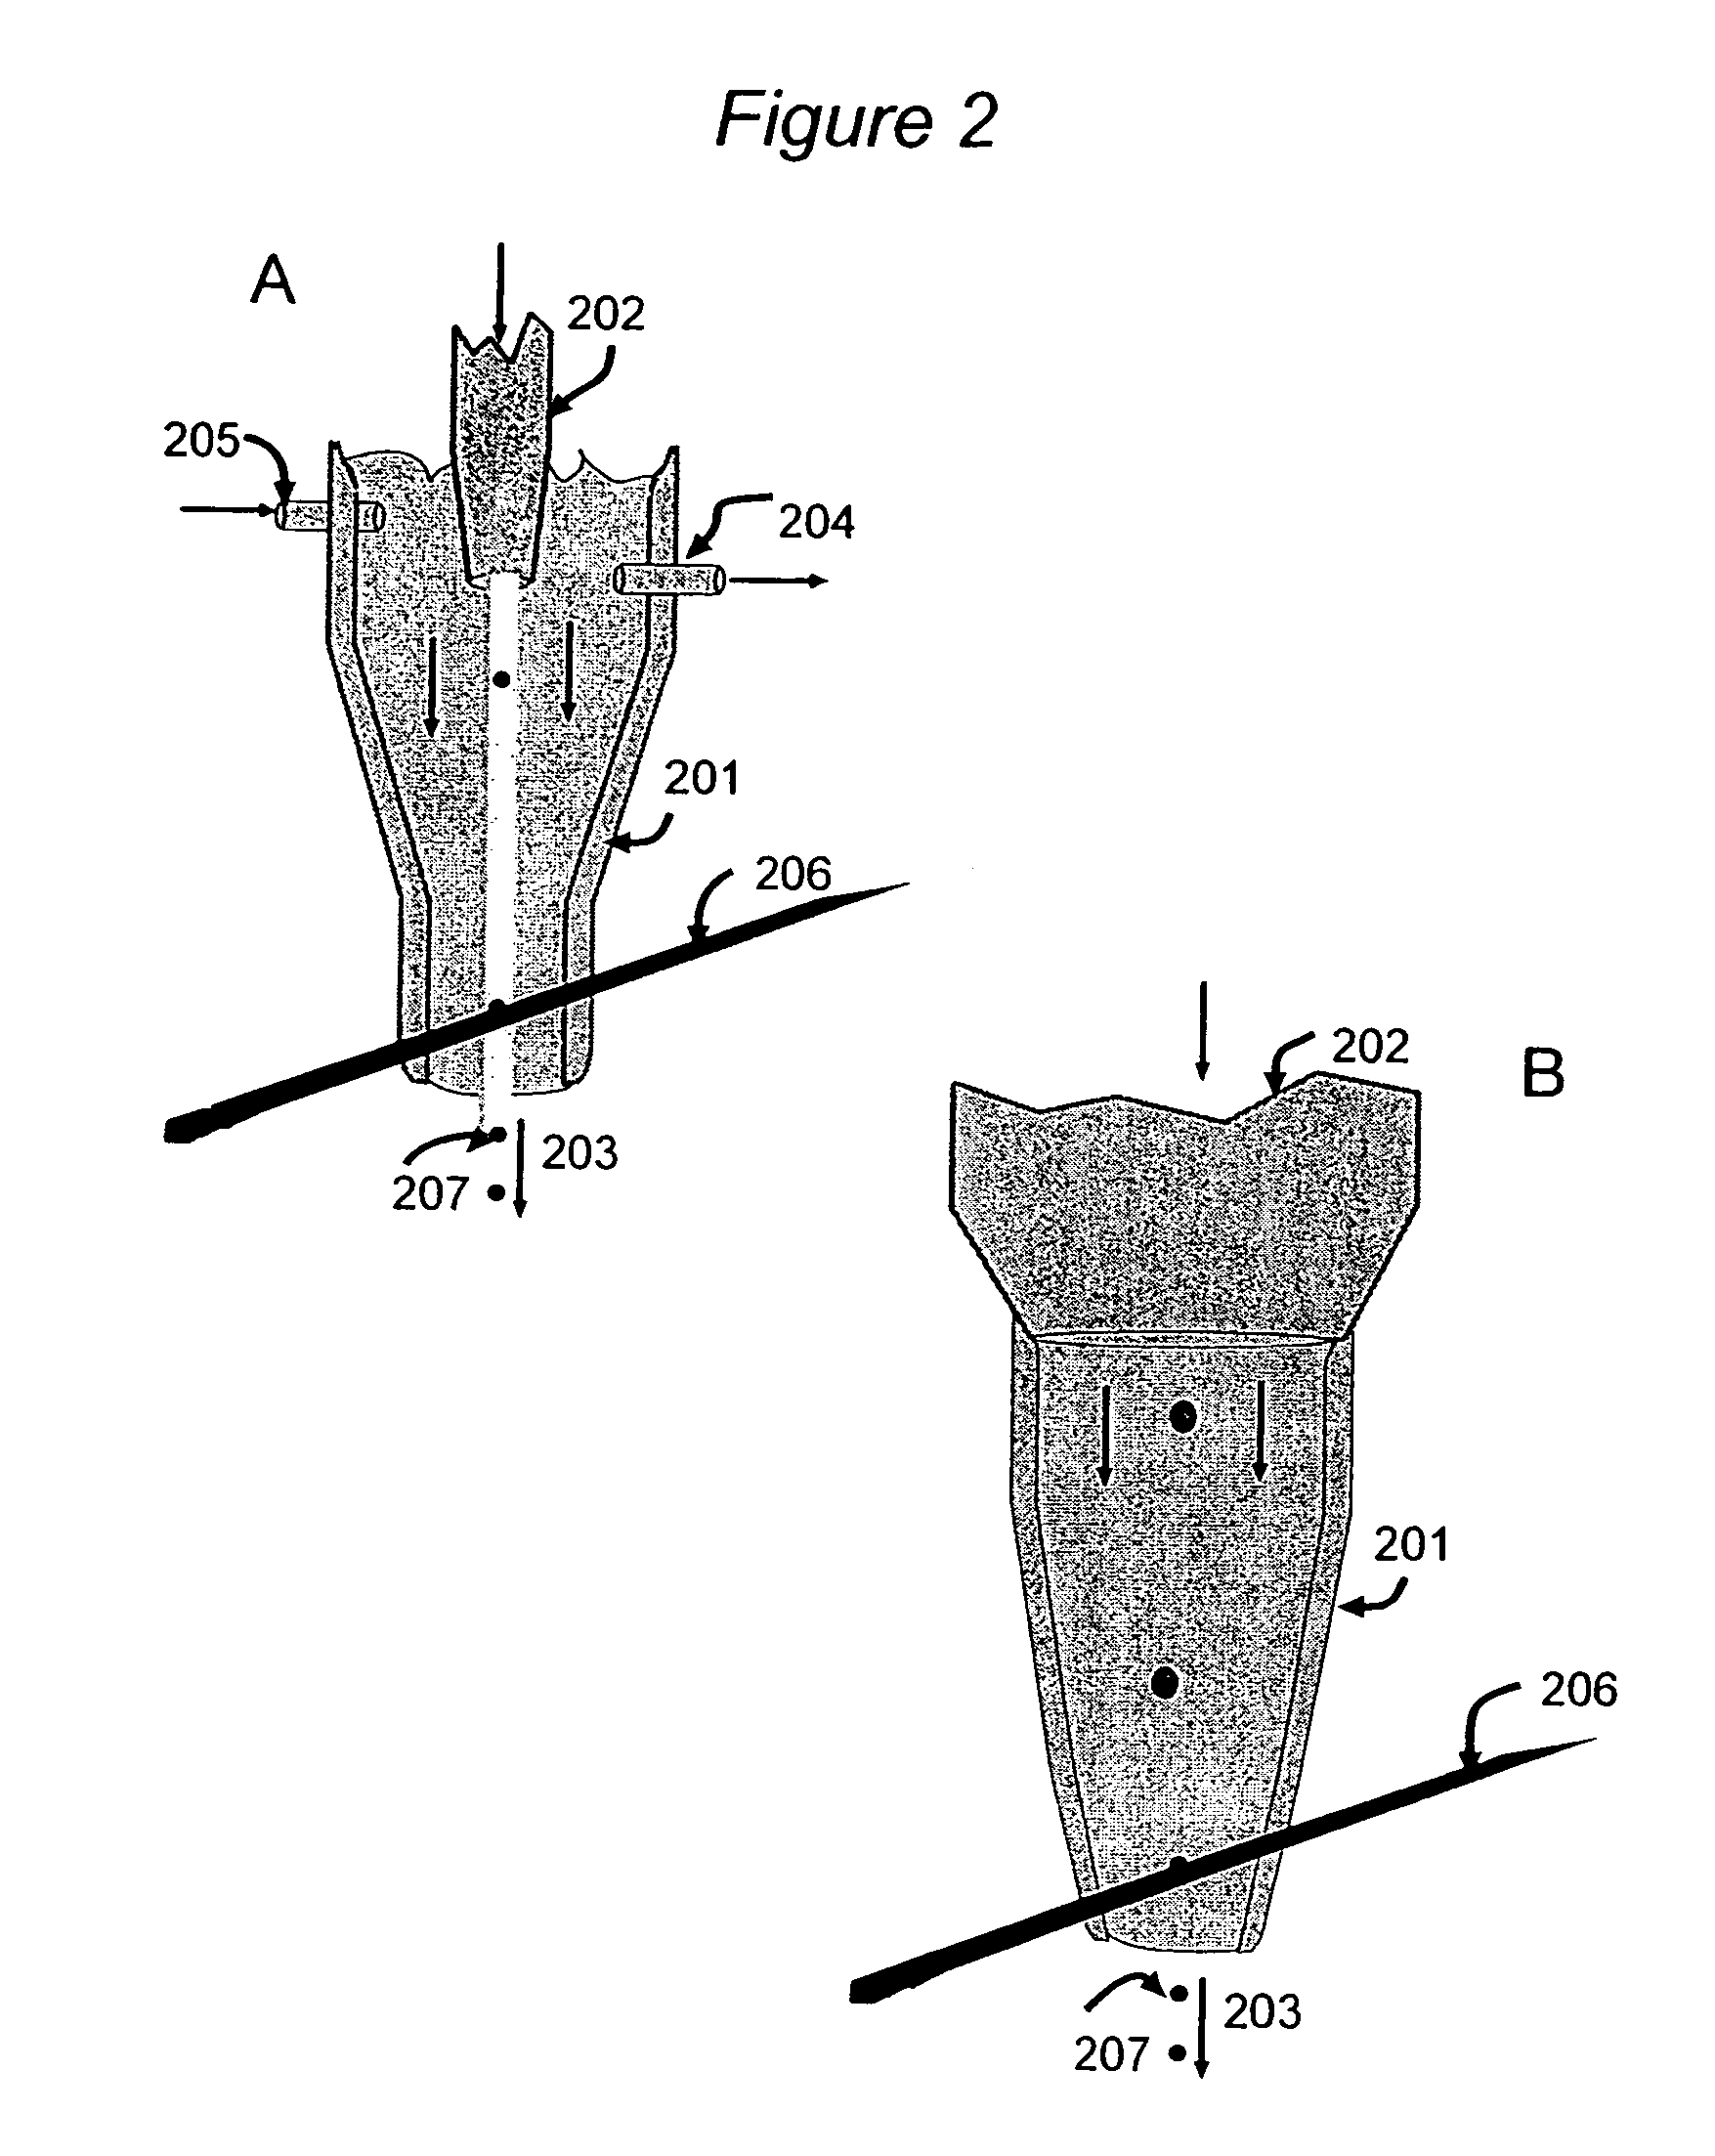 Multi-spectral detector and analysis system